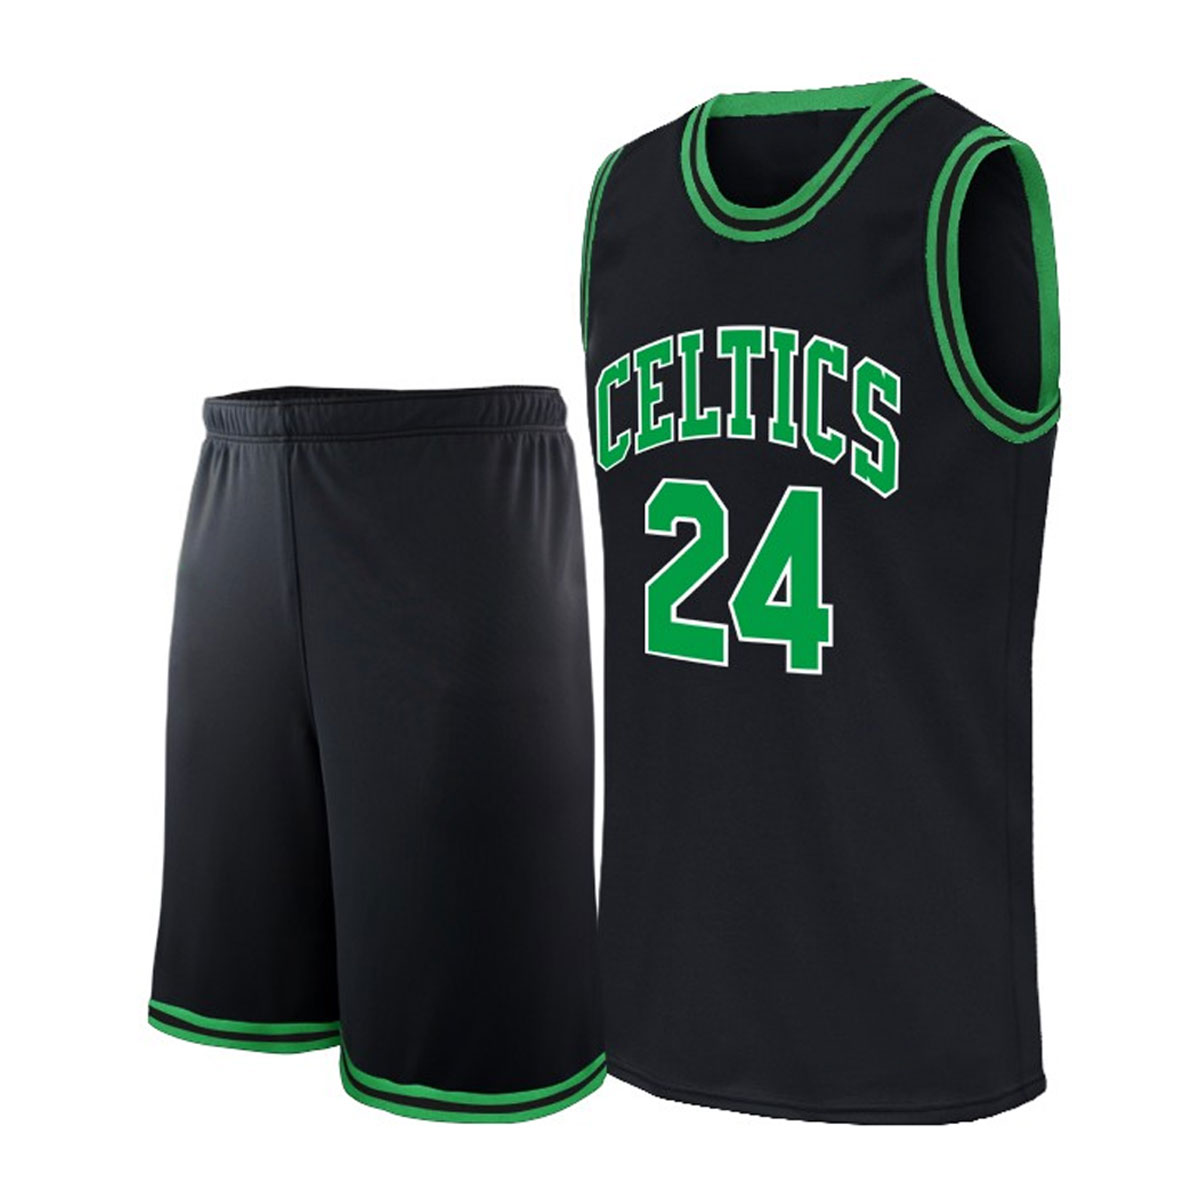 High-quality basketball uniforms designed for teams, featuring customizable options and premium materials.